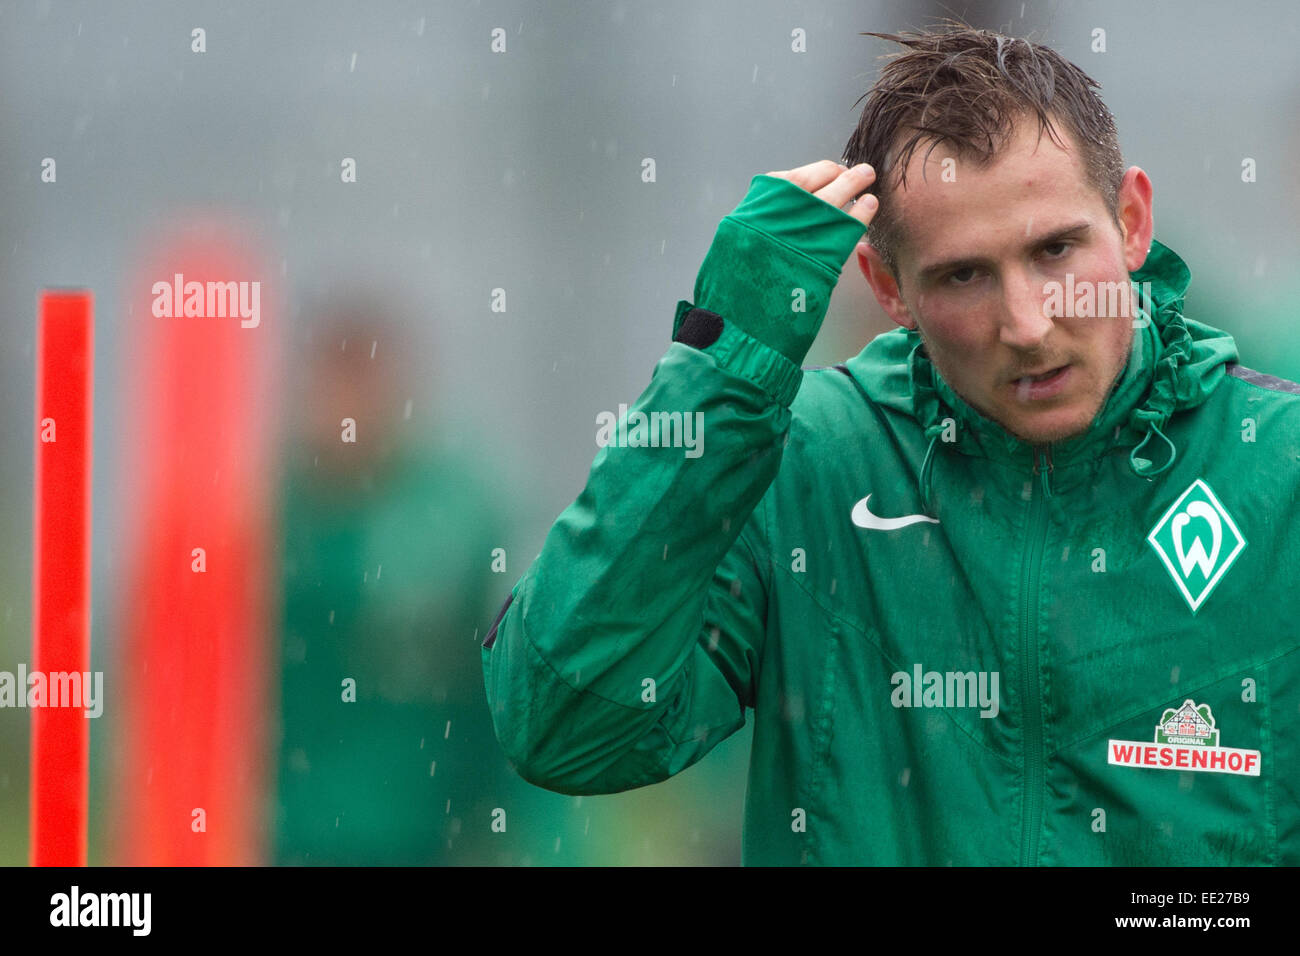 Belek, Turkey. 13th Jan, 2015. Werder Bremen's player Izet Hajrovic wipes the rain from his face during a training session in Belek, Turkey, 13 January 2015. Werder Bremen stays in Belek to prepare for the second half of the German Bundesliga season. Photo: Soeren Stache/dpa/Alamy Live News Stock Photo